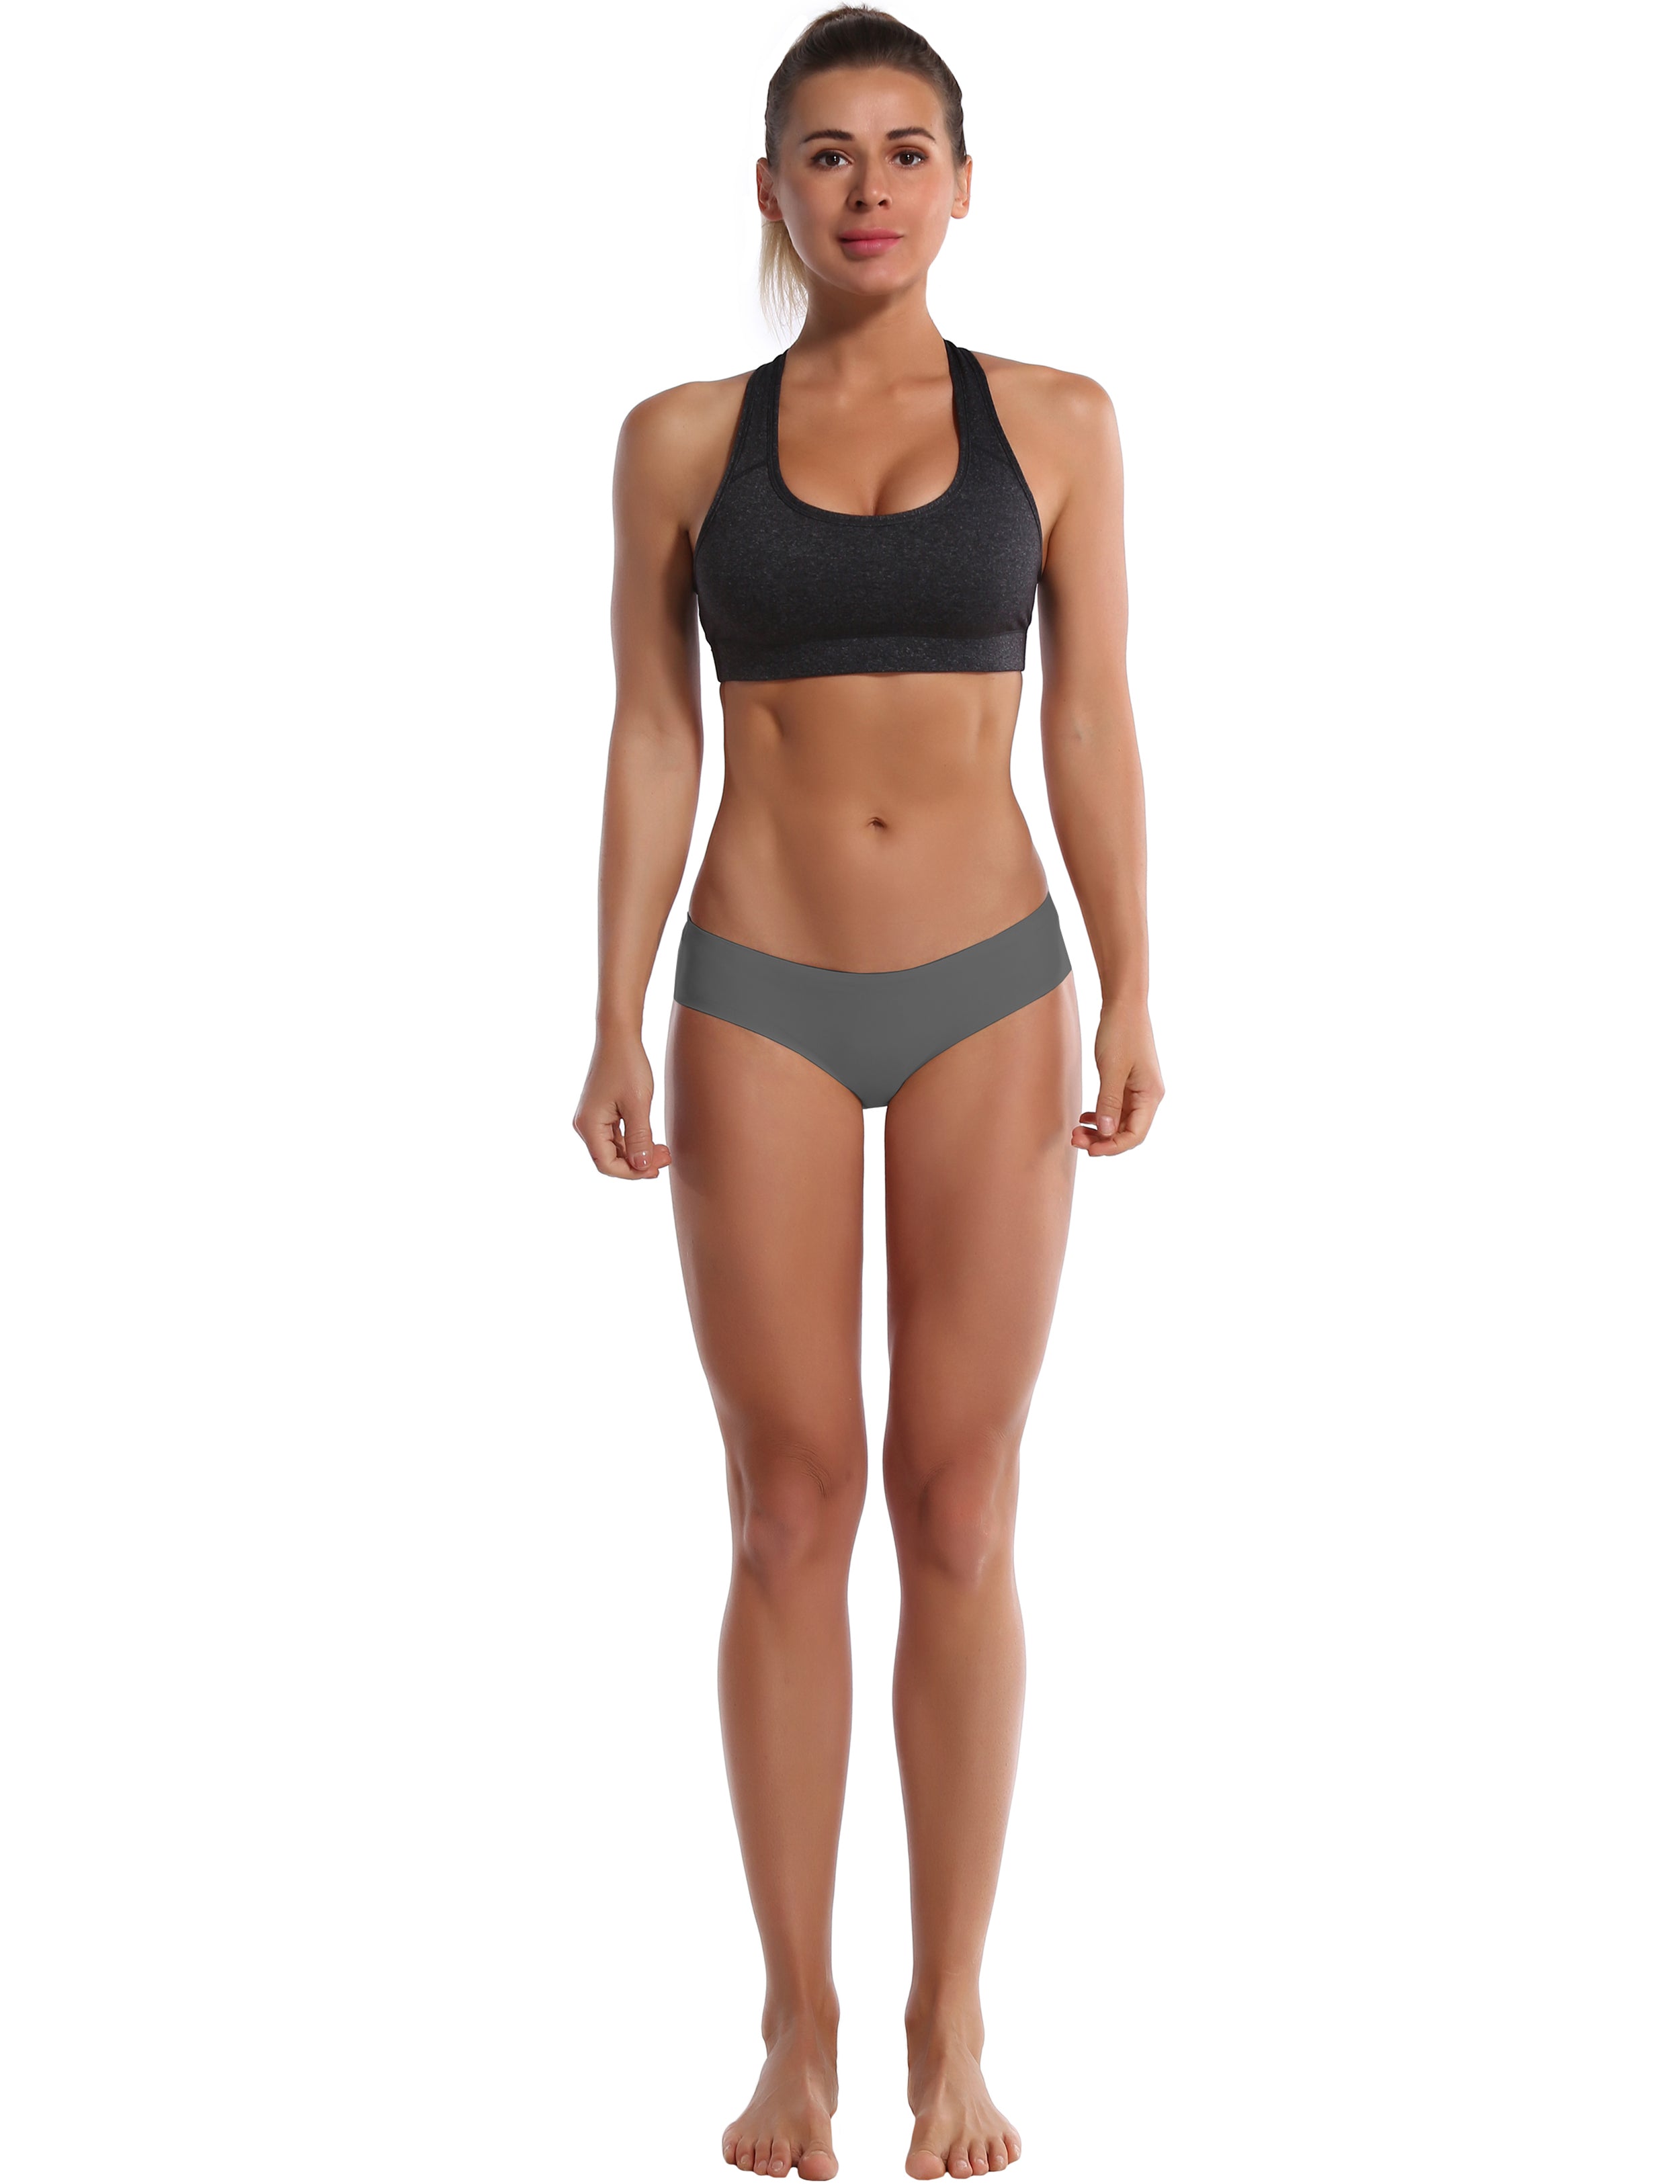 Invisibles Sport Bikini Panties darkgray Sleek, soft, smooth and totally comfortable: our newest bikini style is here. High elasticity High density Softest-ever fabric Laser cutting Unsealed Comfortable No panty lines Machine wash 95% Nylon, 5% Spandex